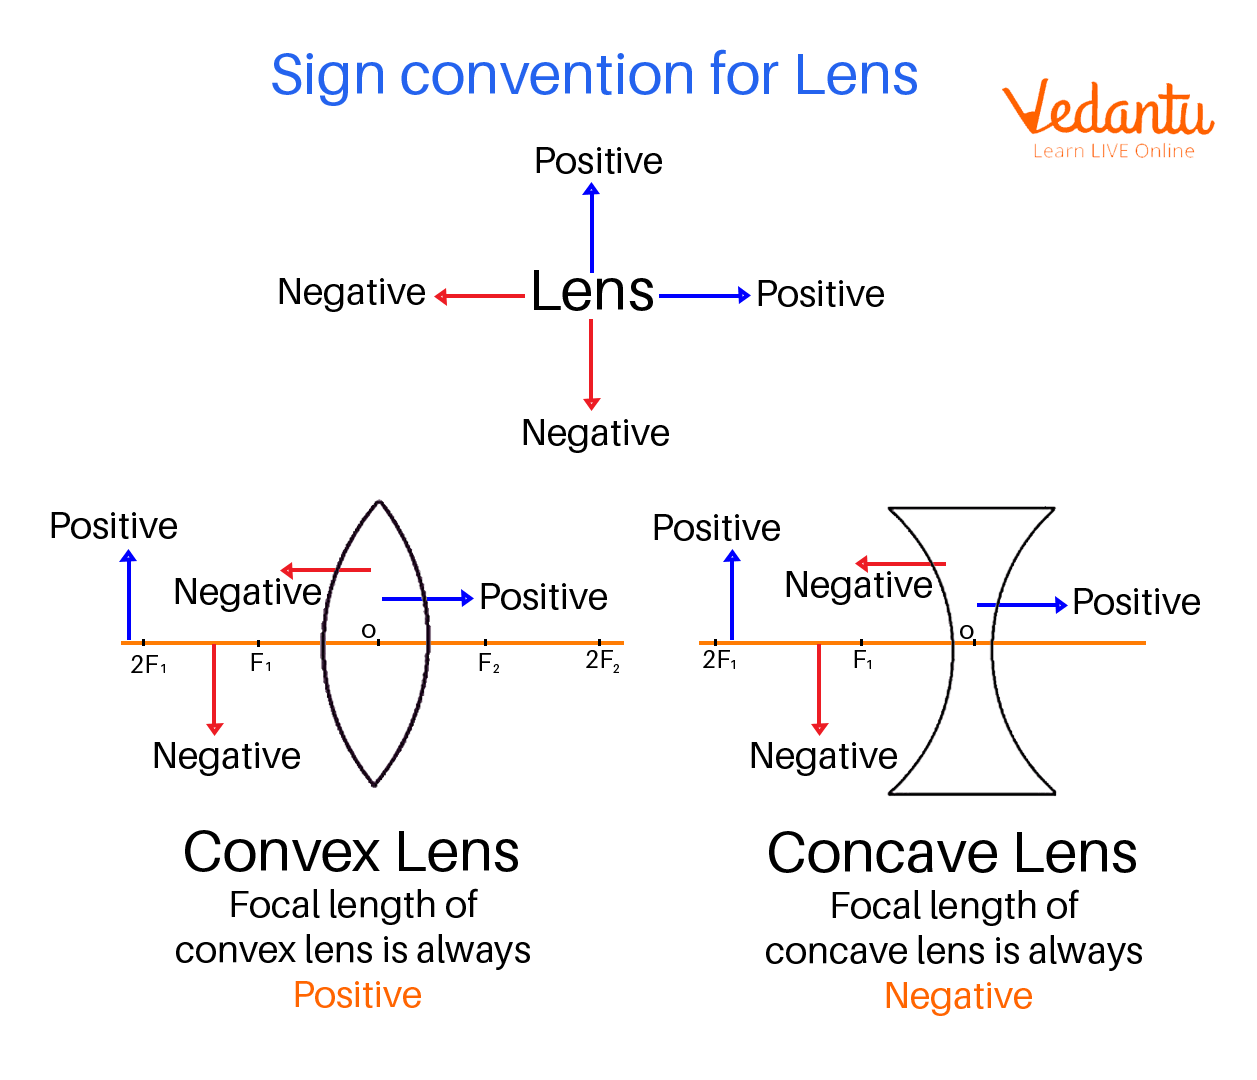 Sign convention for lens